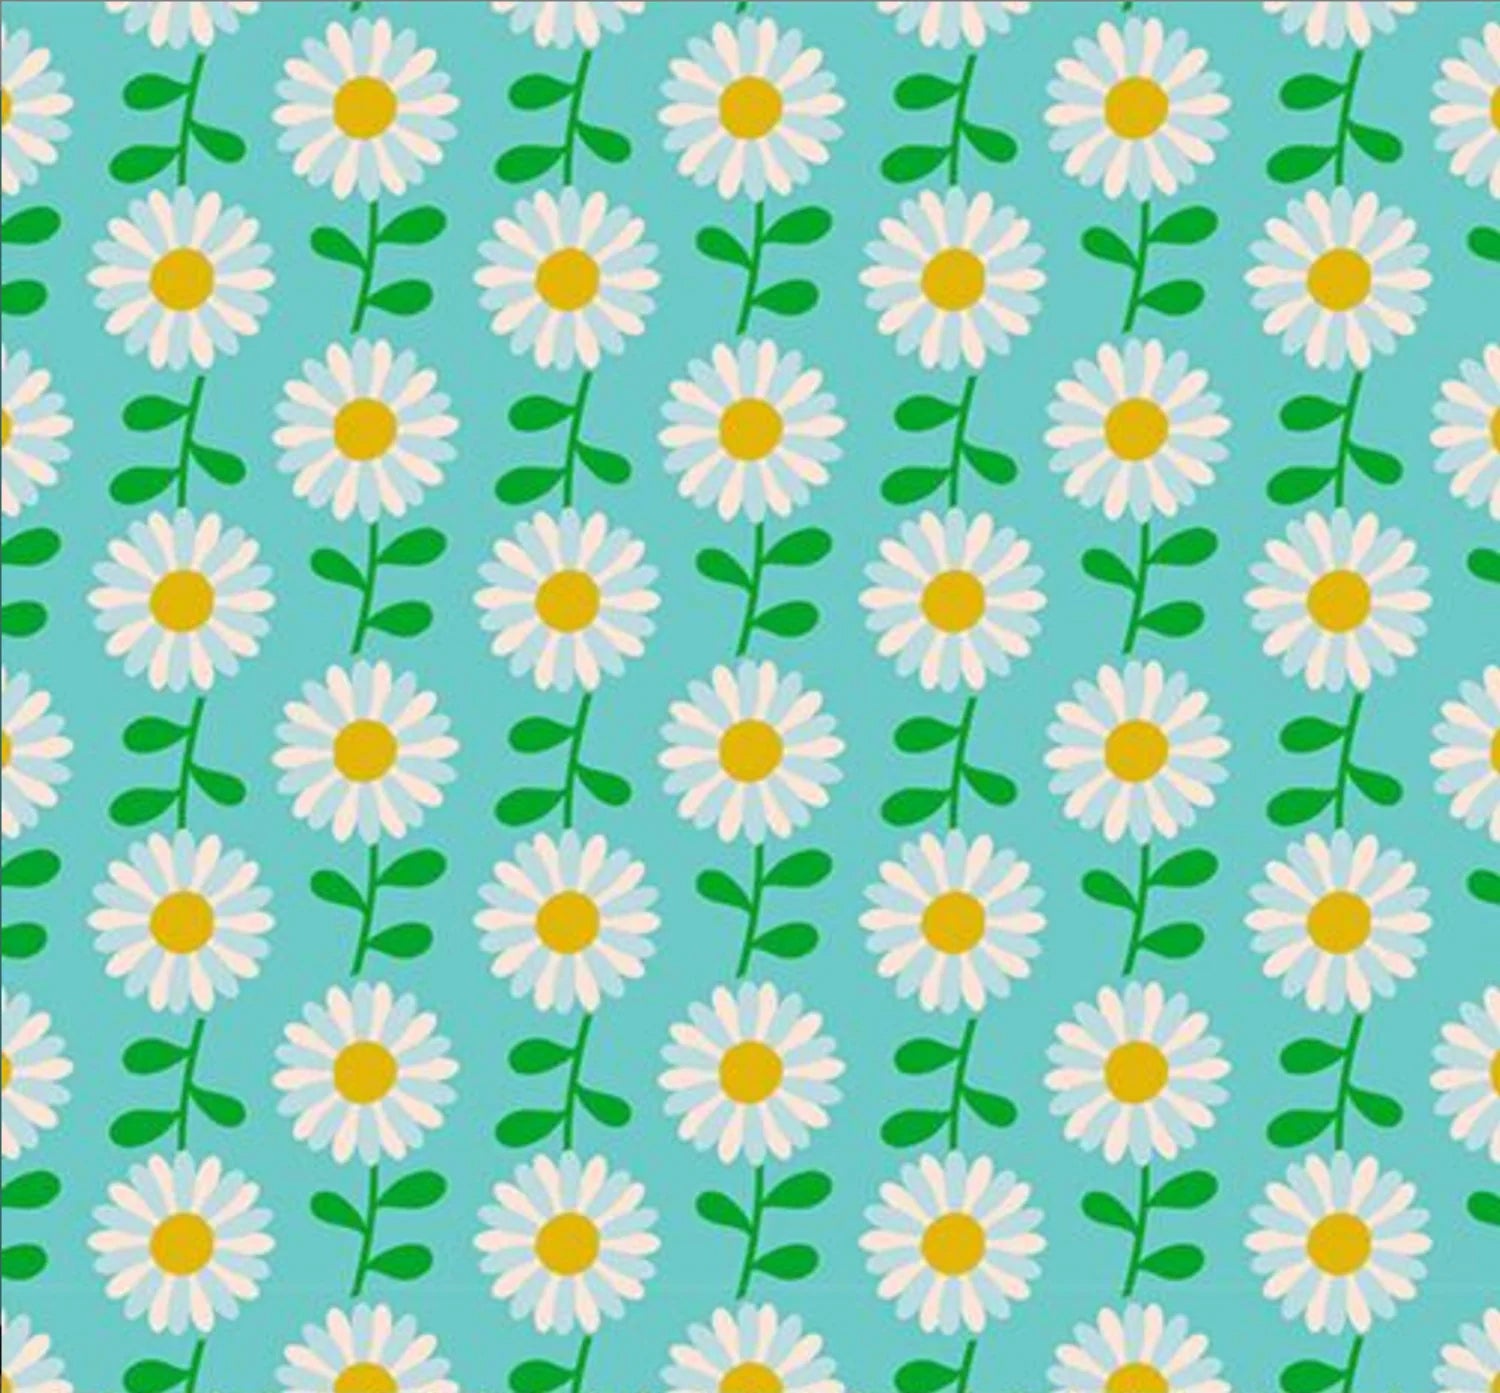 Field of Flowers in Turquoise - Flowerland by Ruby Star Society